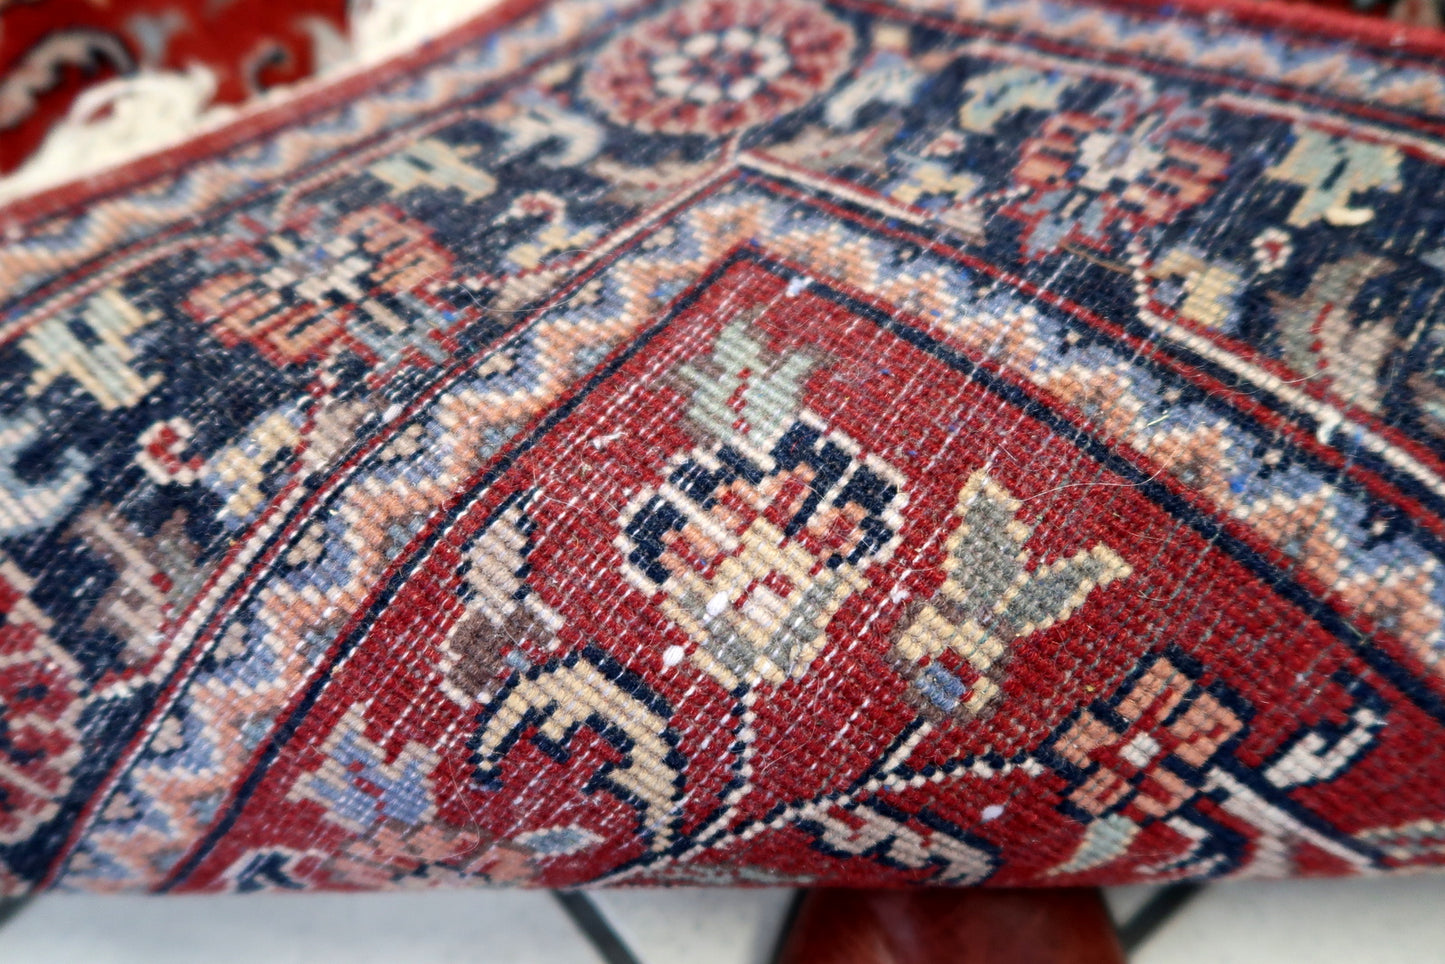 Back view of the vintage Persian style Sarouk rug highlighting its craftsmanship and size